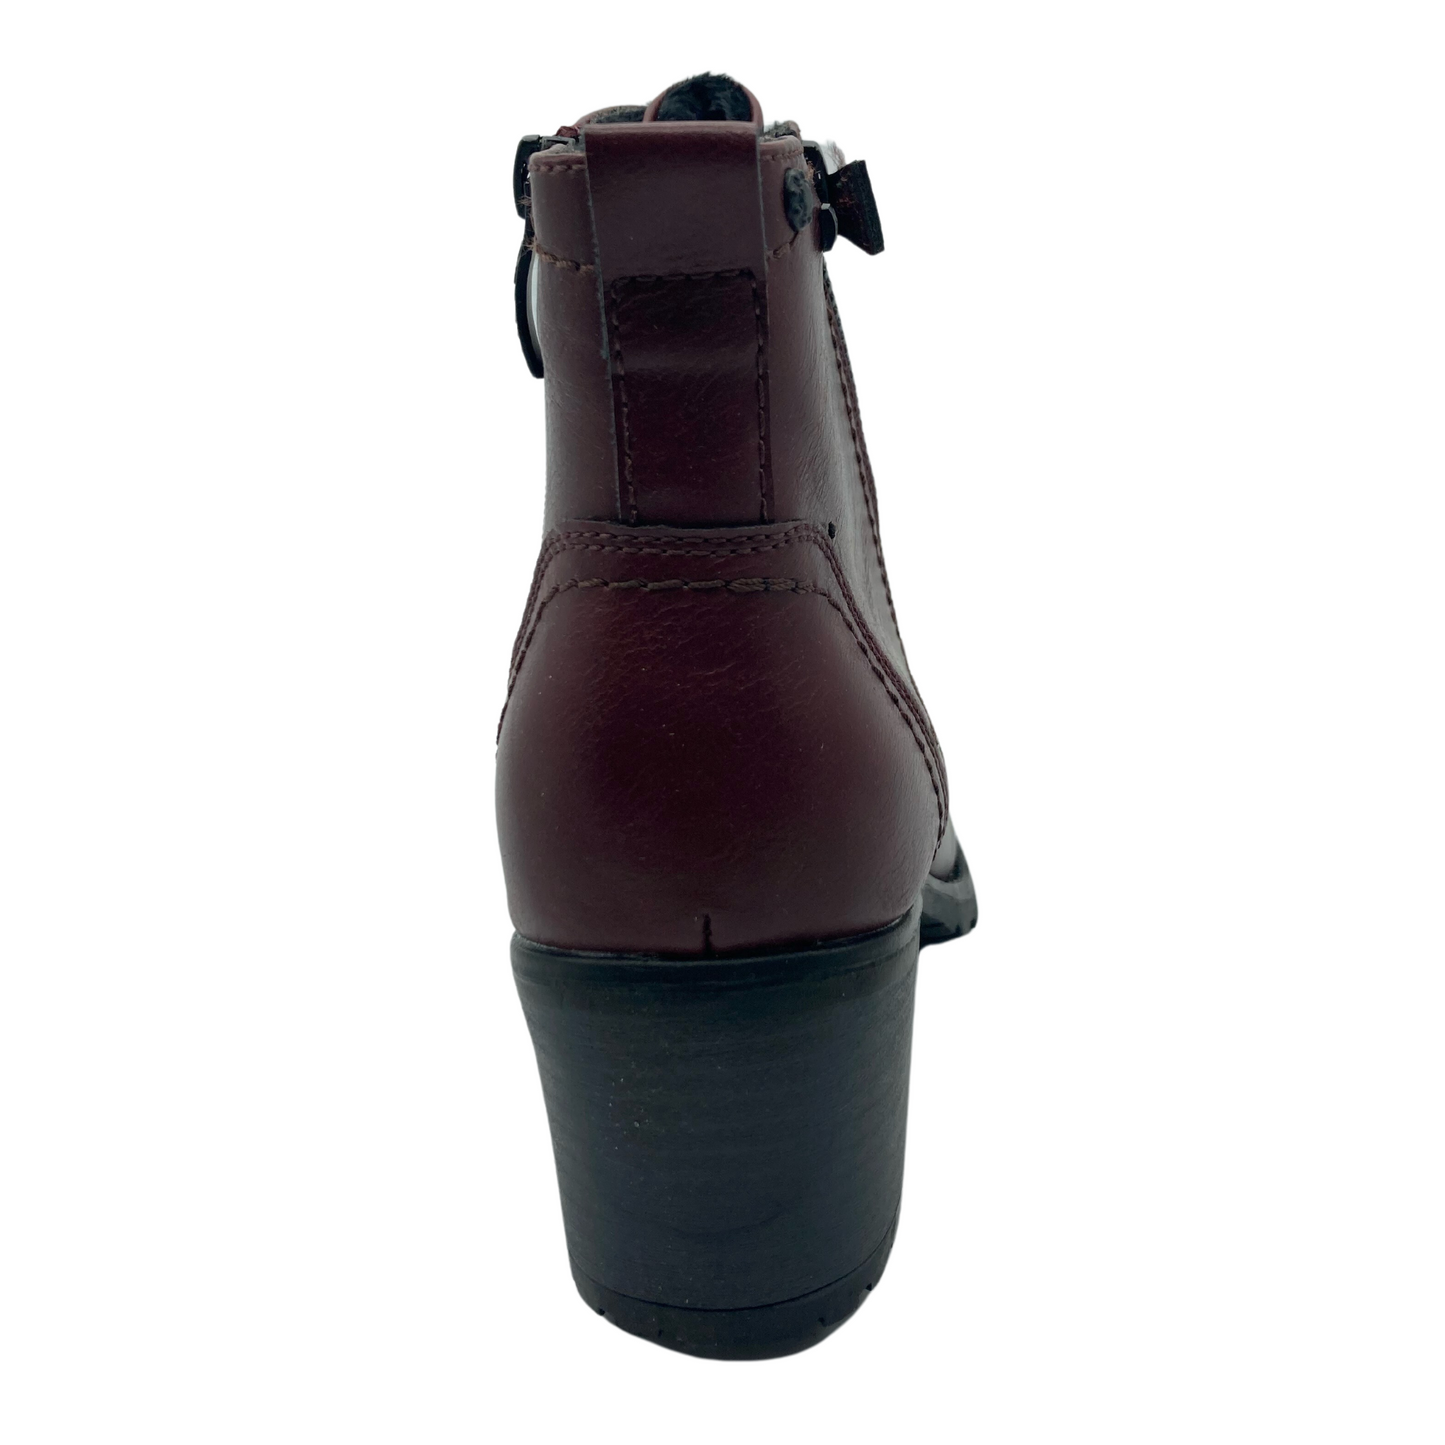 Back view of wine red bootie with black block heel and double zipper closures